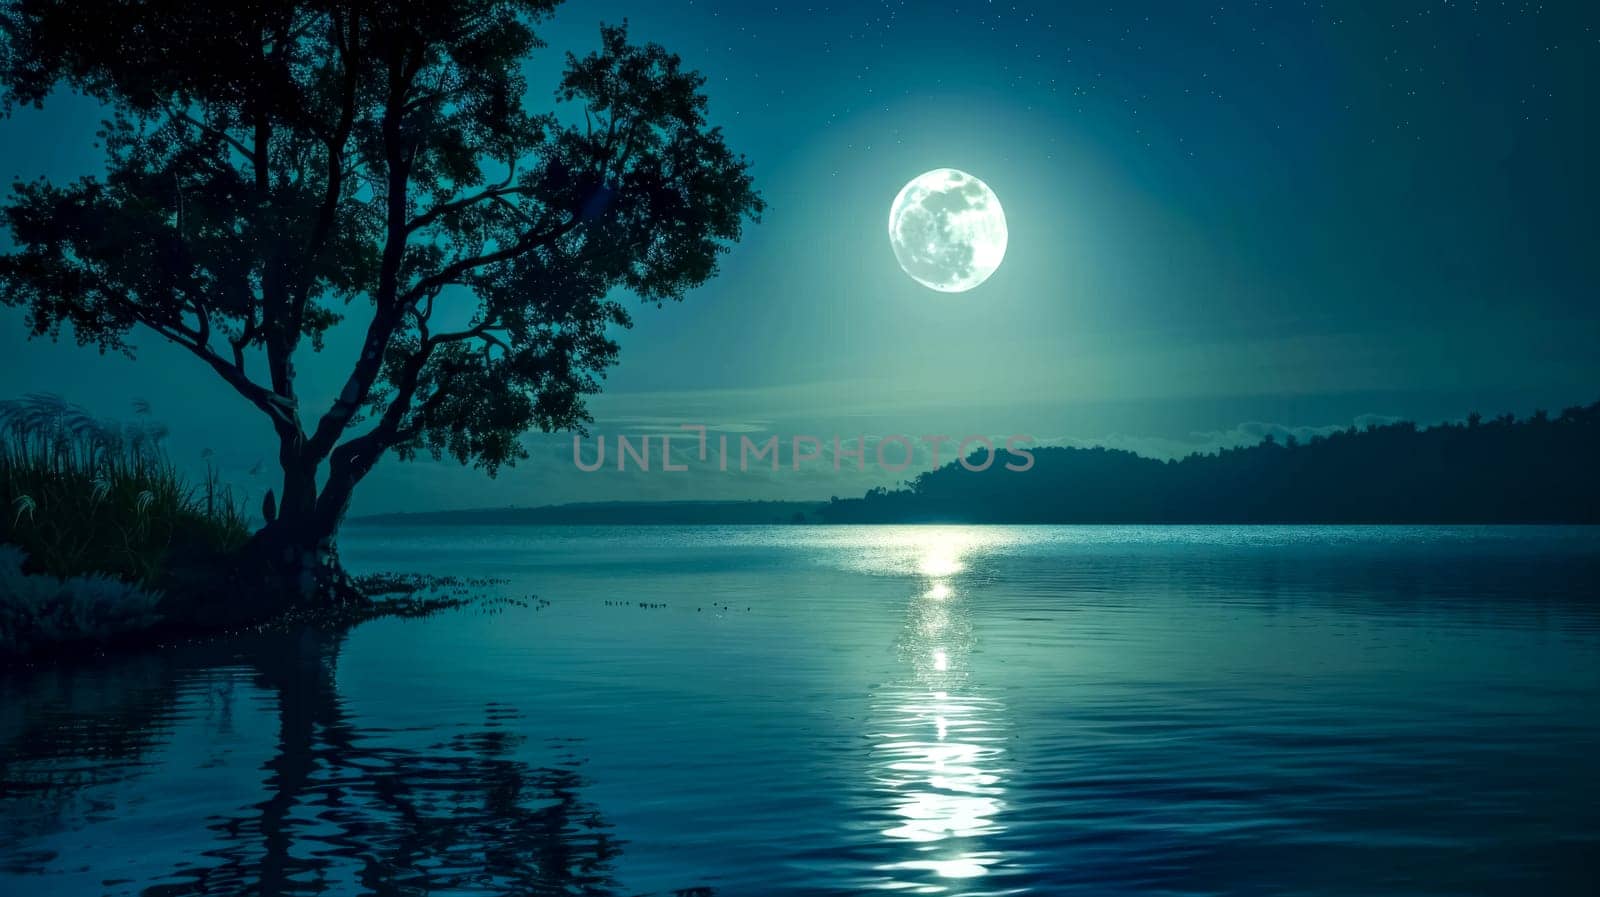 Serene night scene with a full moon reflecting over a calm lake beside a silhouette of a lone tree by Edophoto